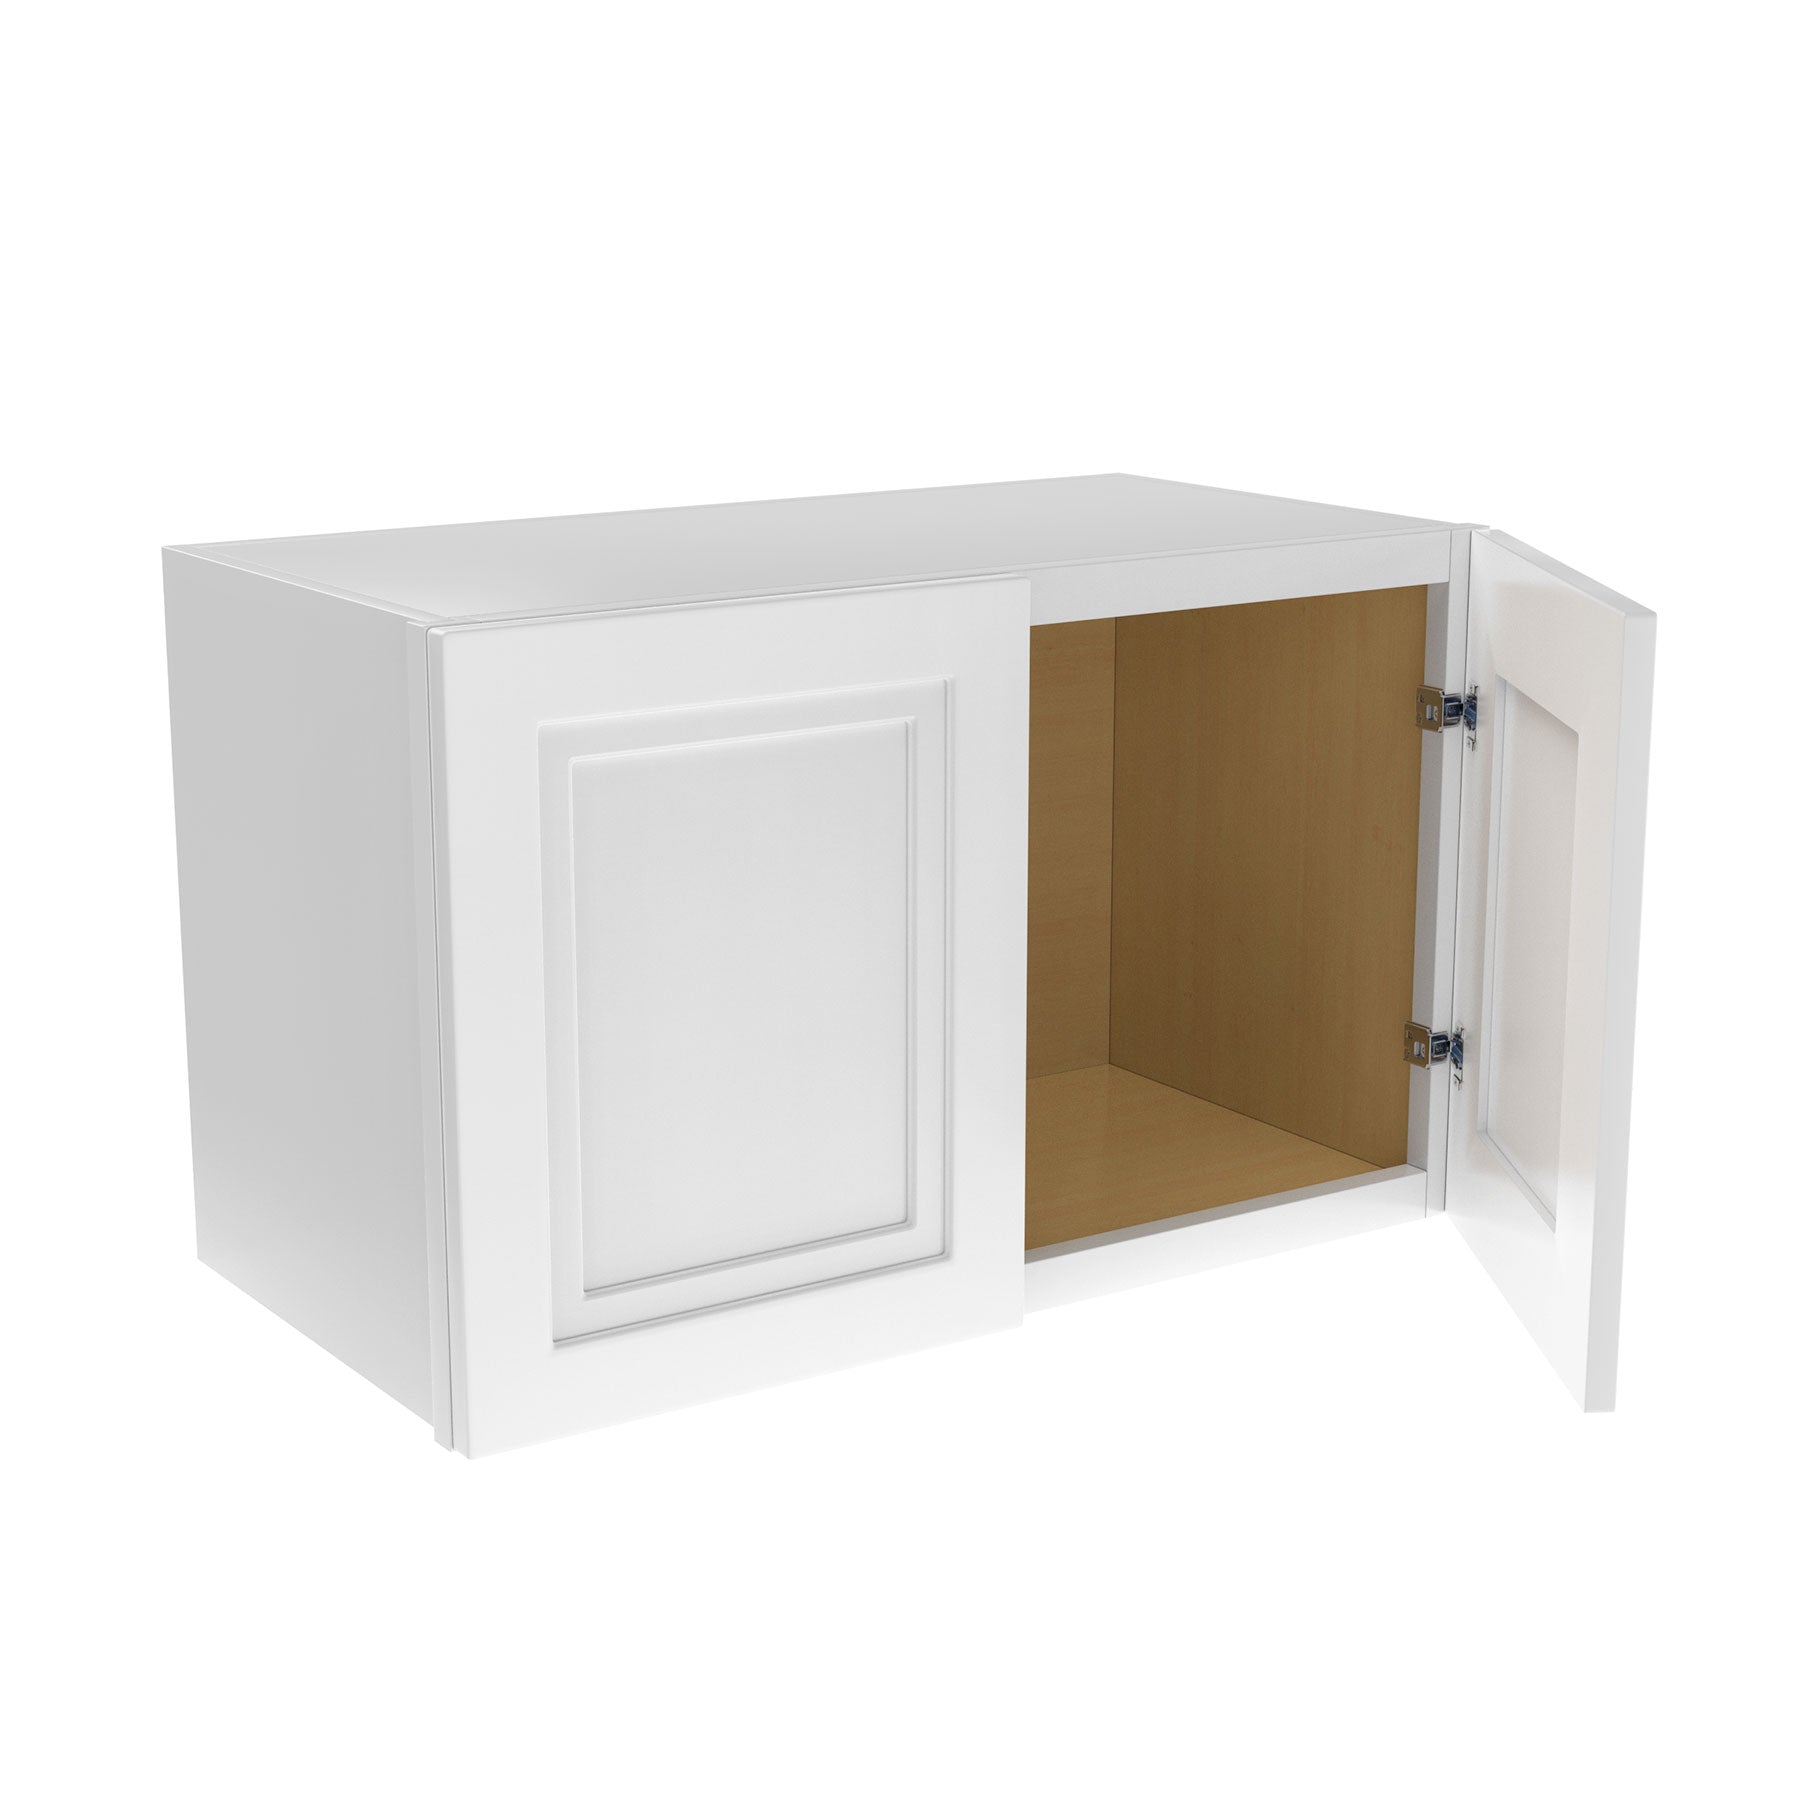 Fashion White - Double Door Wall Cabinet | 24"W x 15"H x 12"D